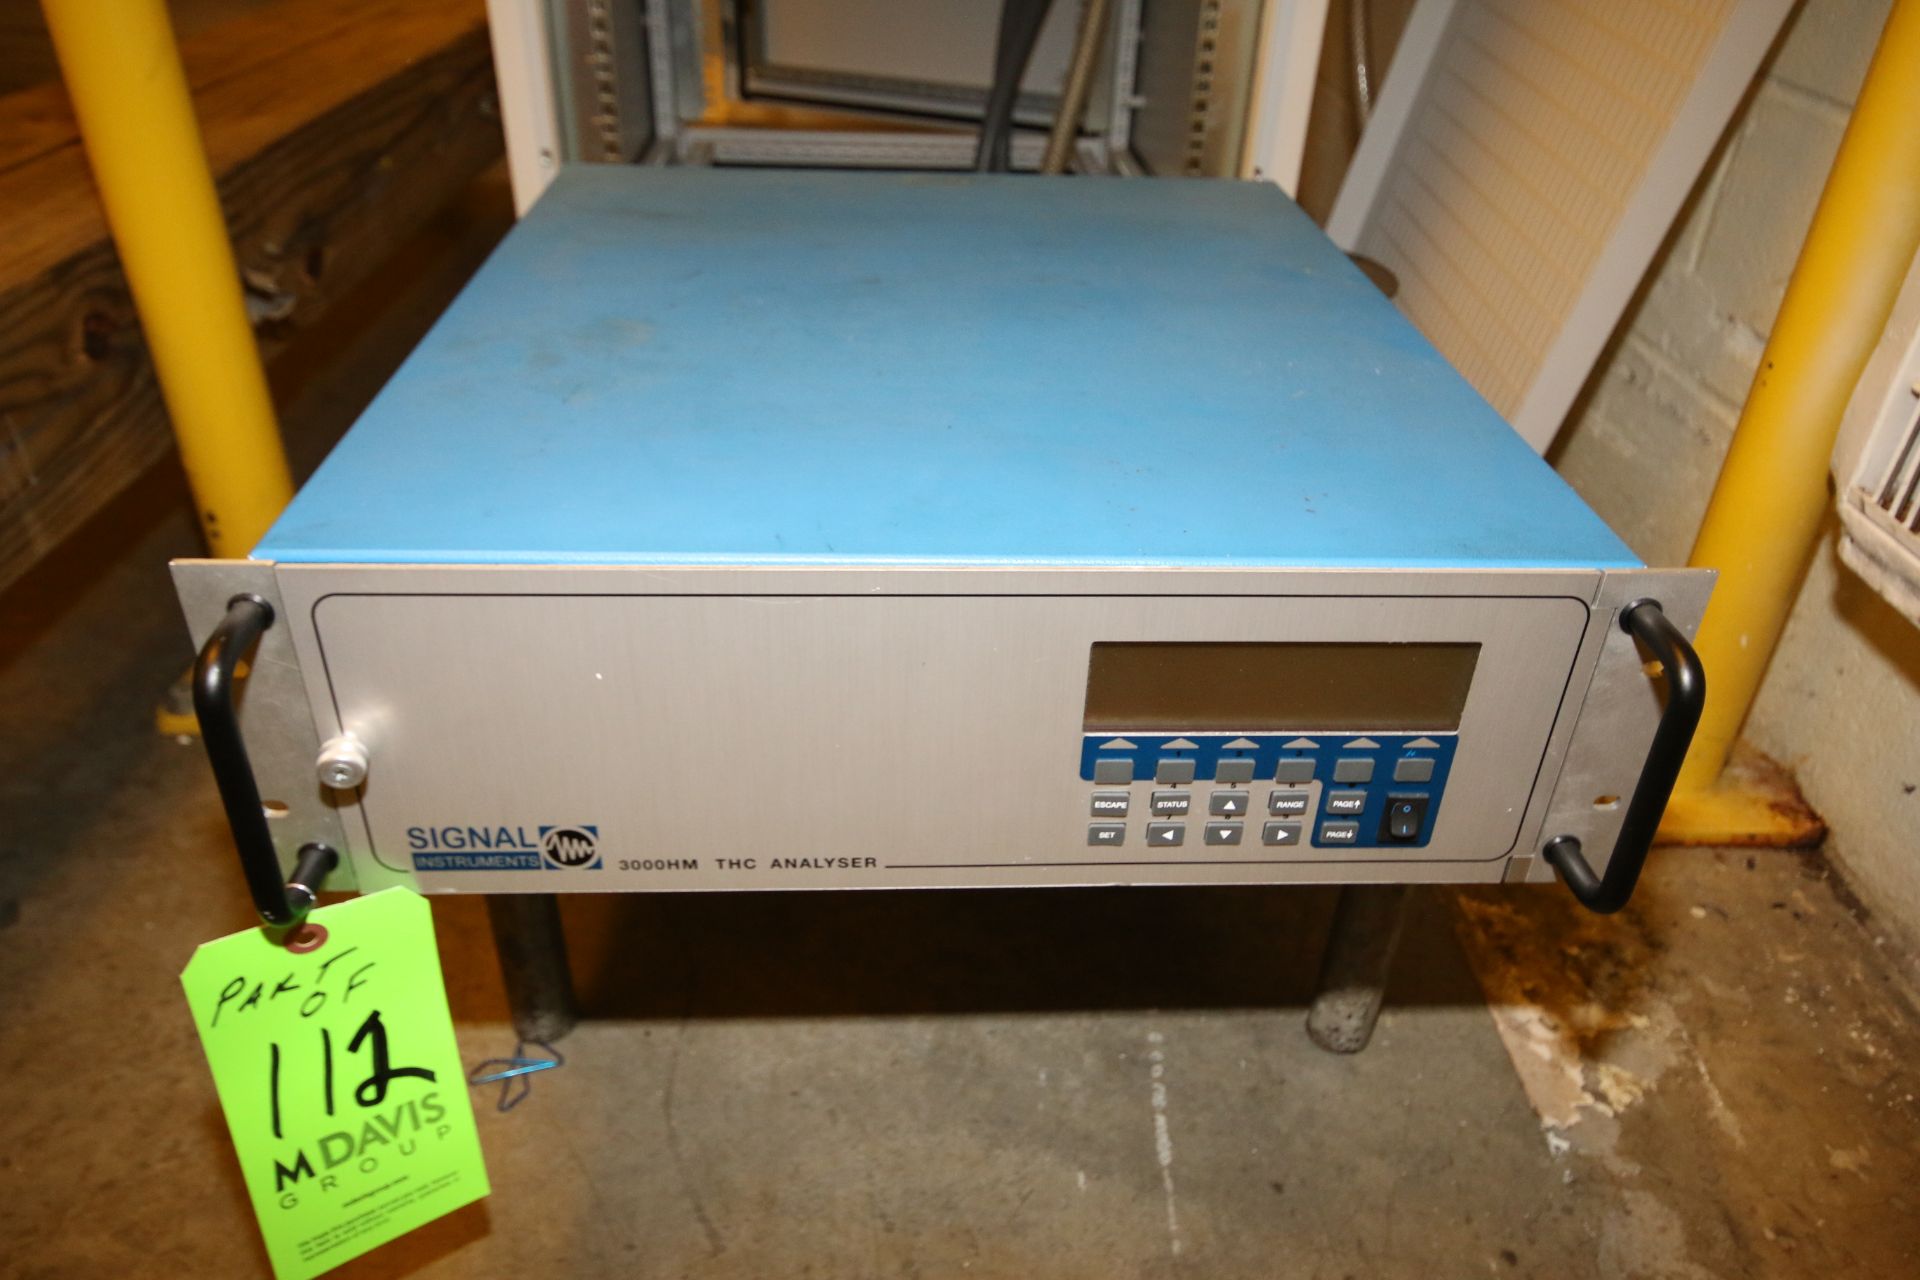 Dryer Oxidizer Emission Safety Analyzer Control Cabinet with Signal Instruments 320 Cutter and (2) - Image 6 of 6